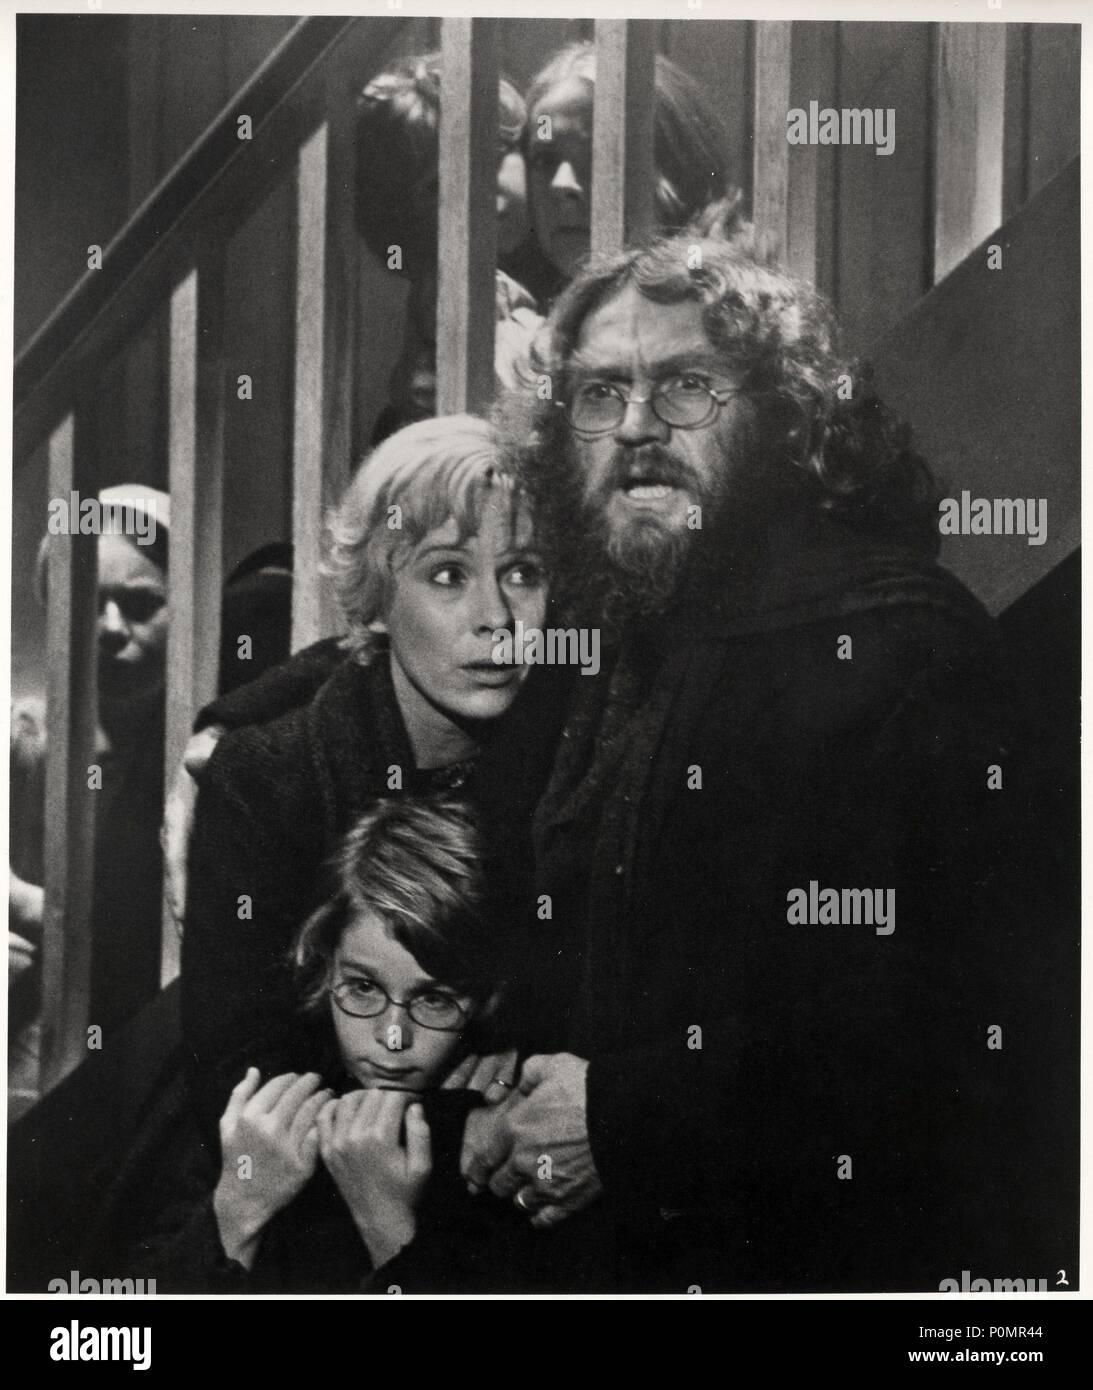 Original Film Title: AN ENEMY OF THE PEOPLE.  English Title: AN ENEMY OF THE PEOPLE.  Film Director: GEORGE SCHAEFER.  Year: 1978.  Stars: BIBI ANDERSSON; STEVE MCQUEEN. Stock Photo